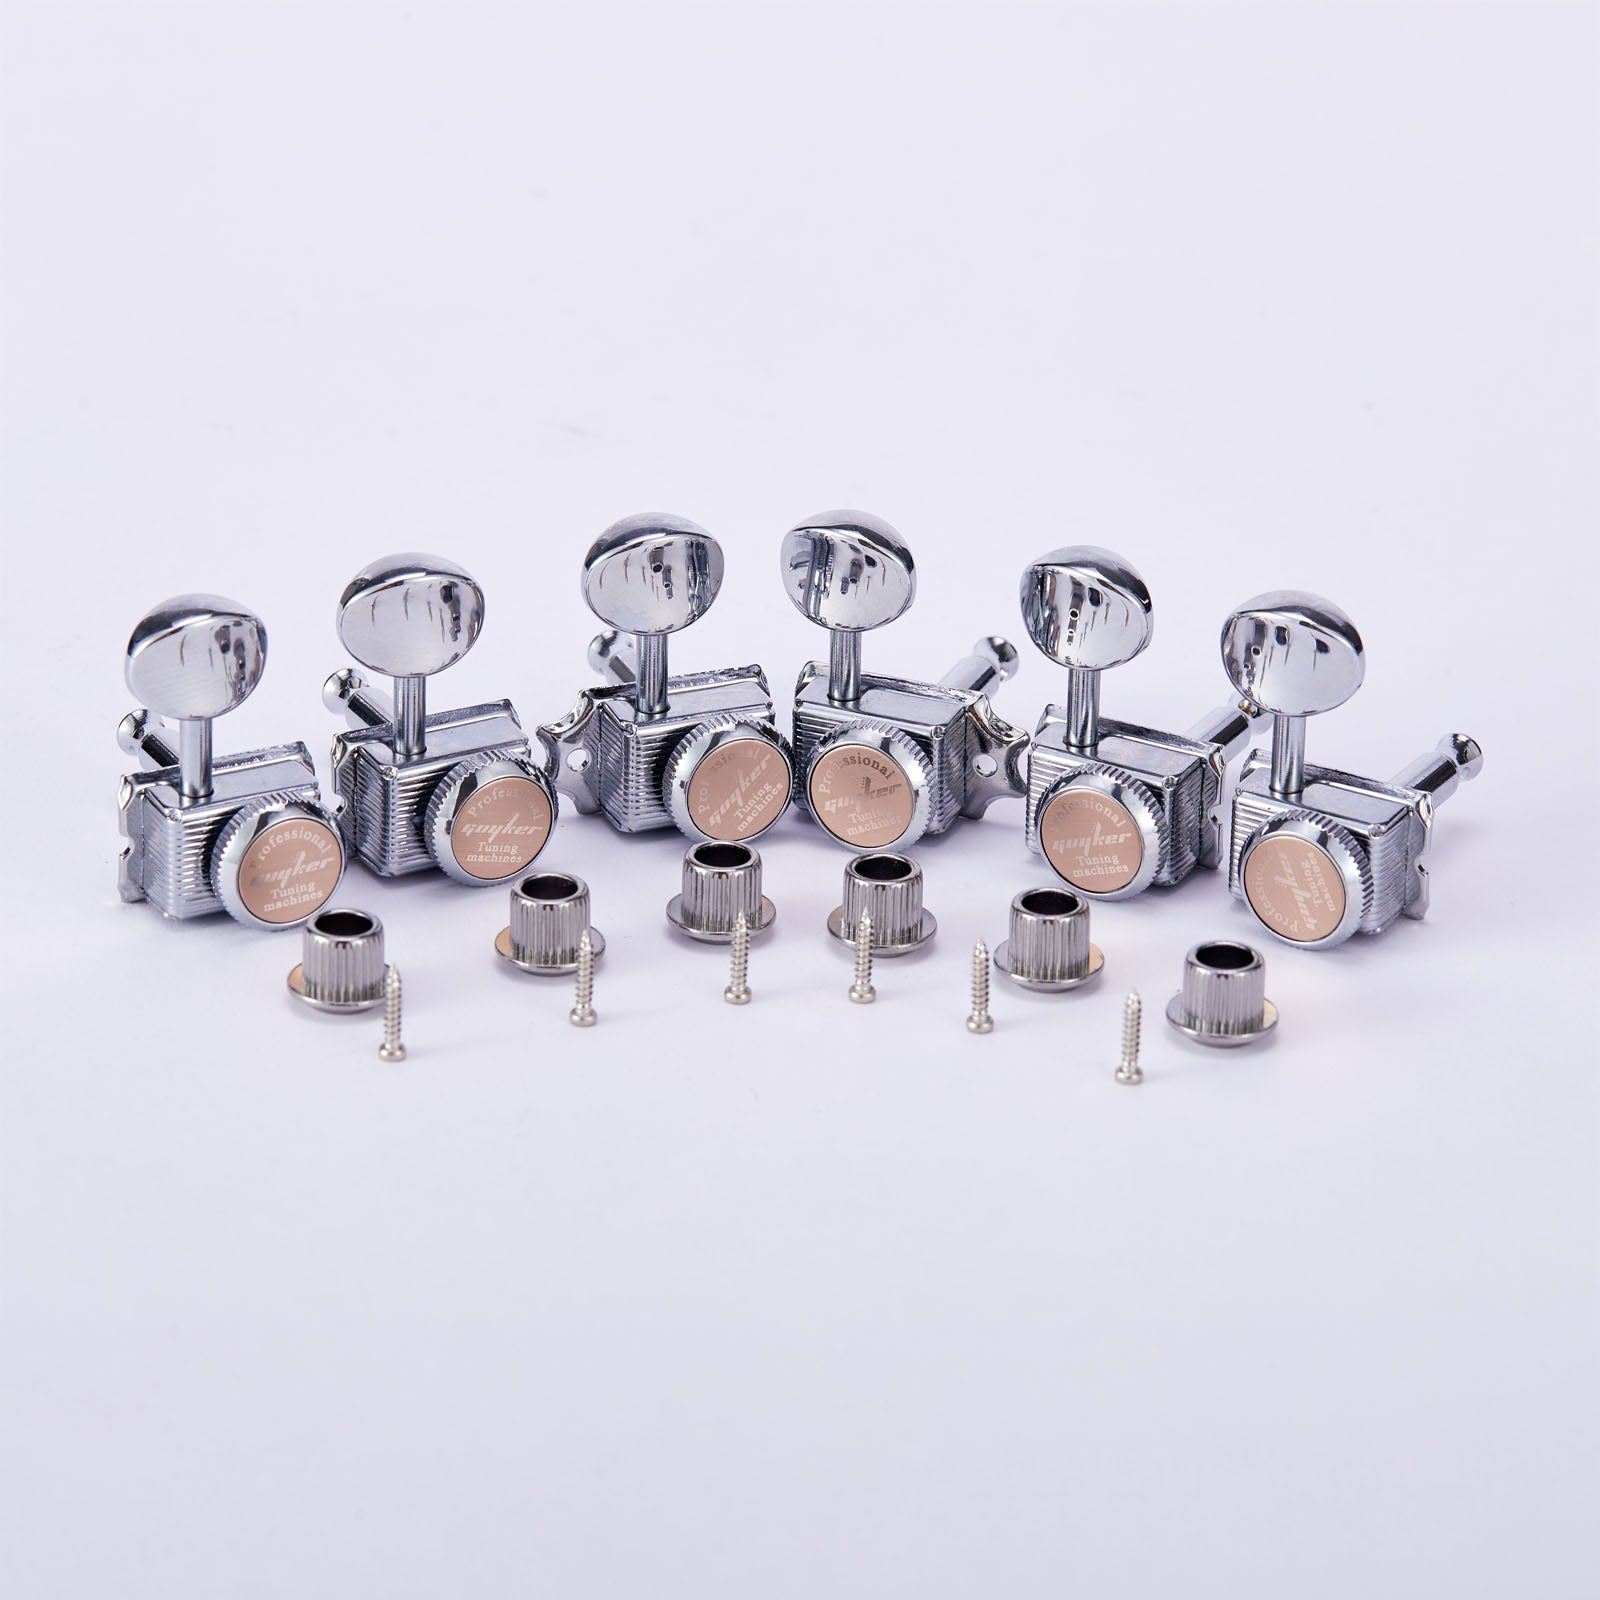 GK-55SP Lock String Tuners Machine Heads For ST TL Guitar